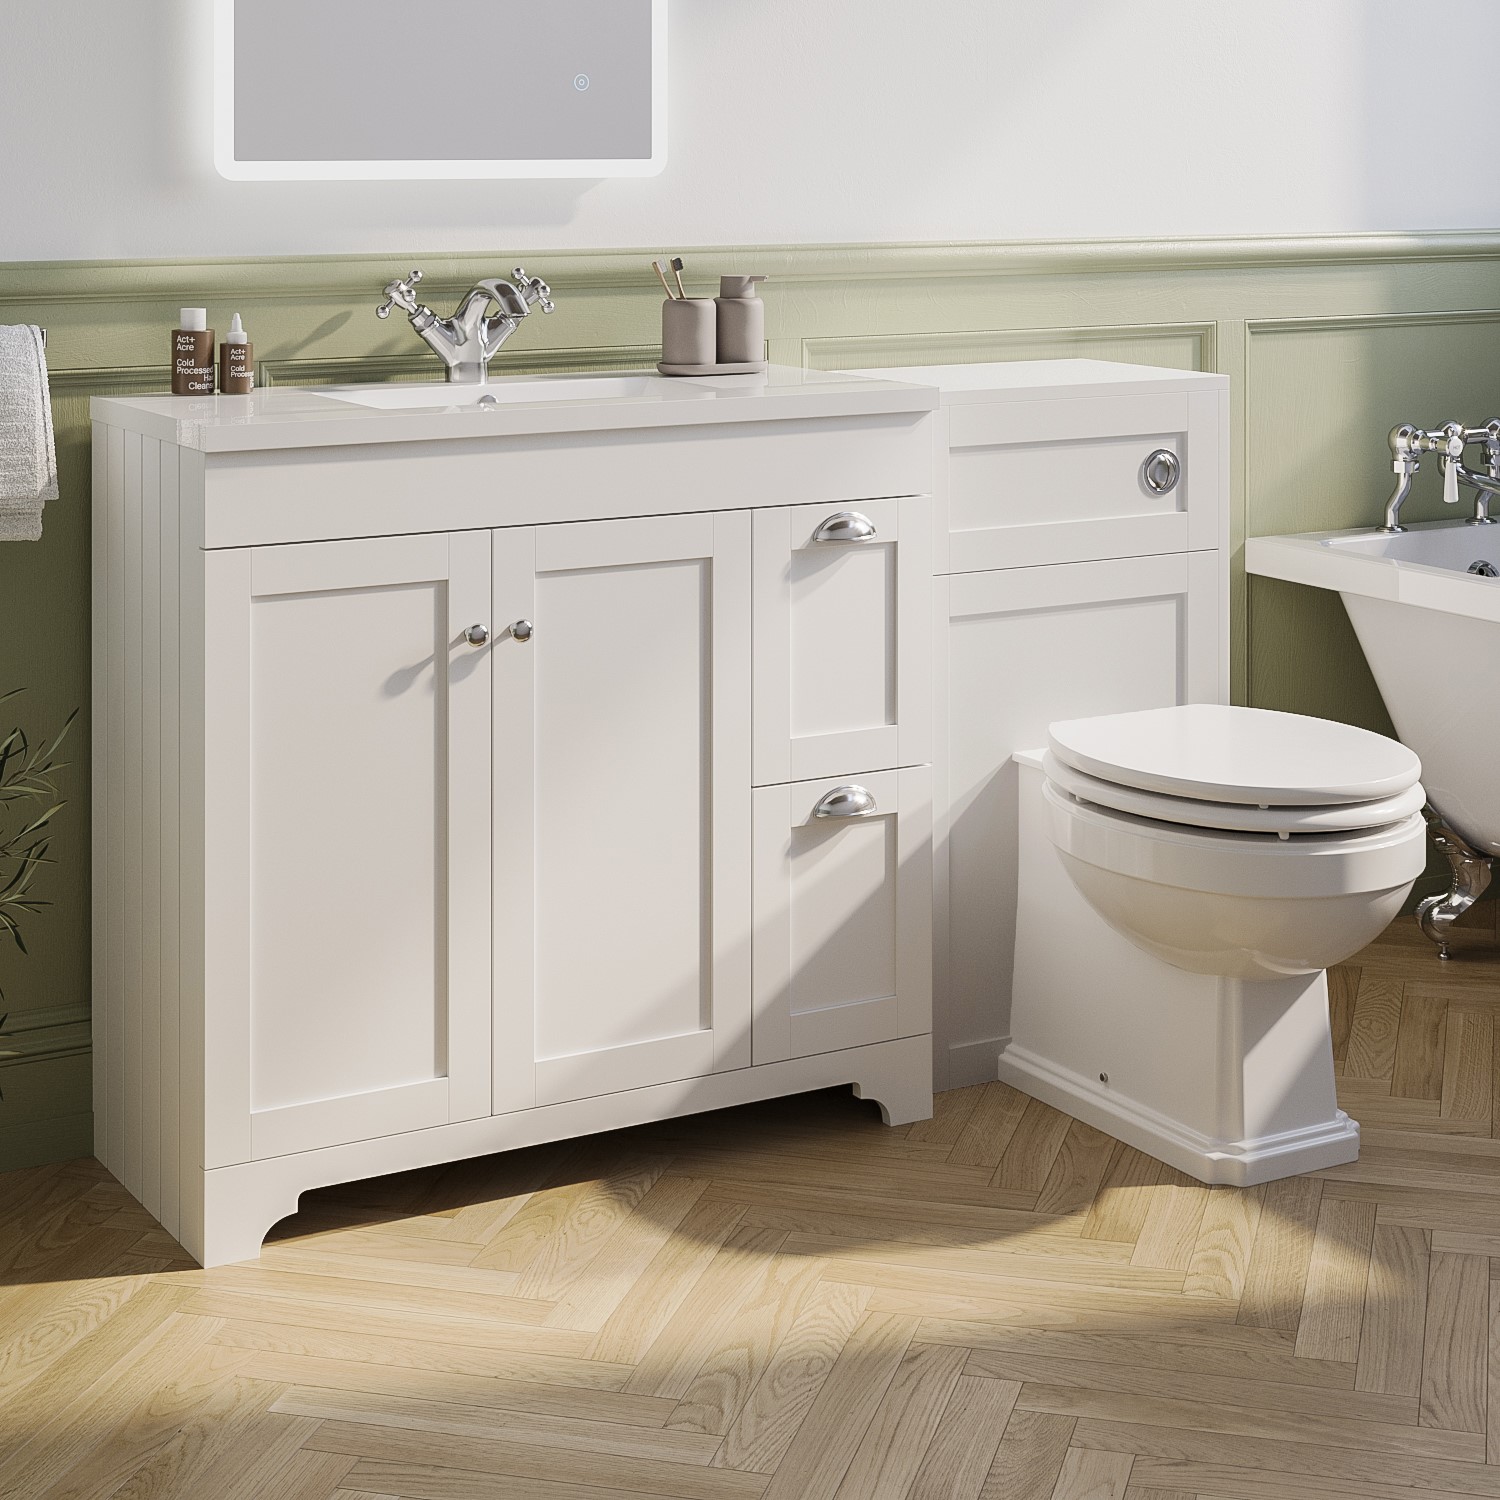 1400mm Toilet and Basin Combination Unit - Traditional Toilet - White - Baxenden